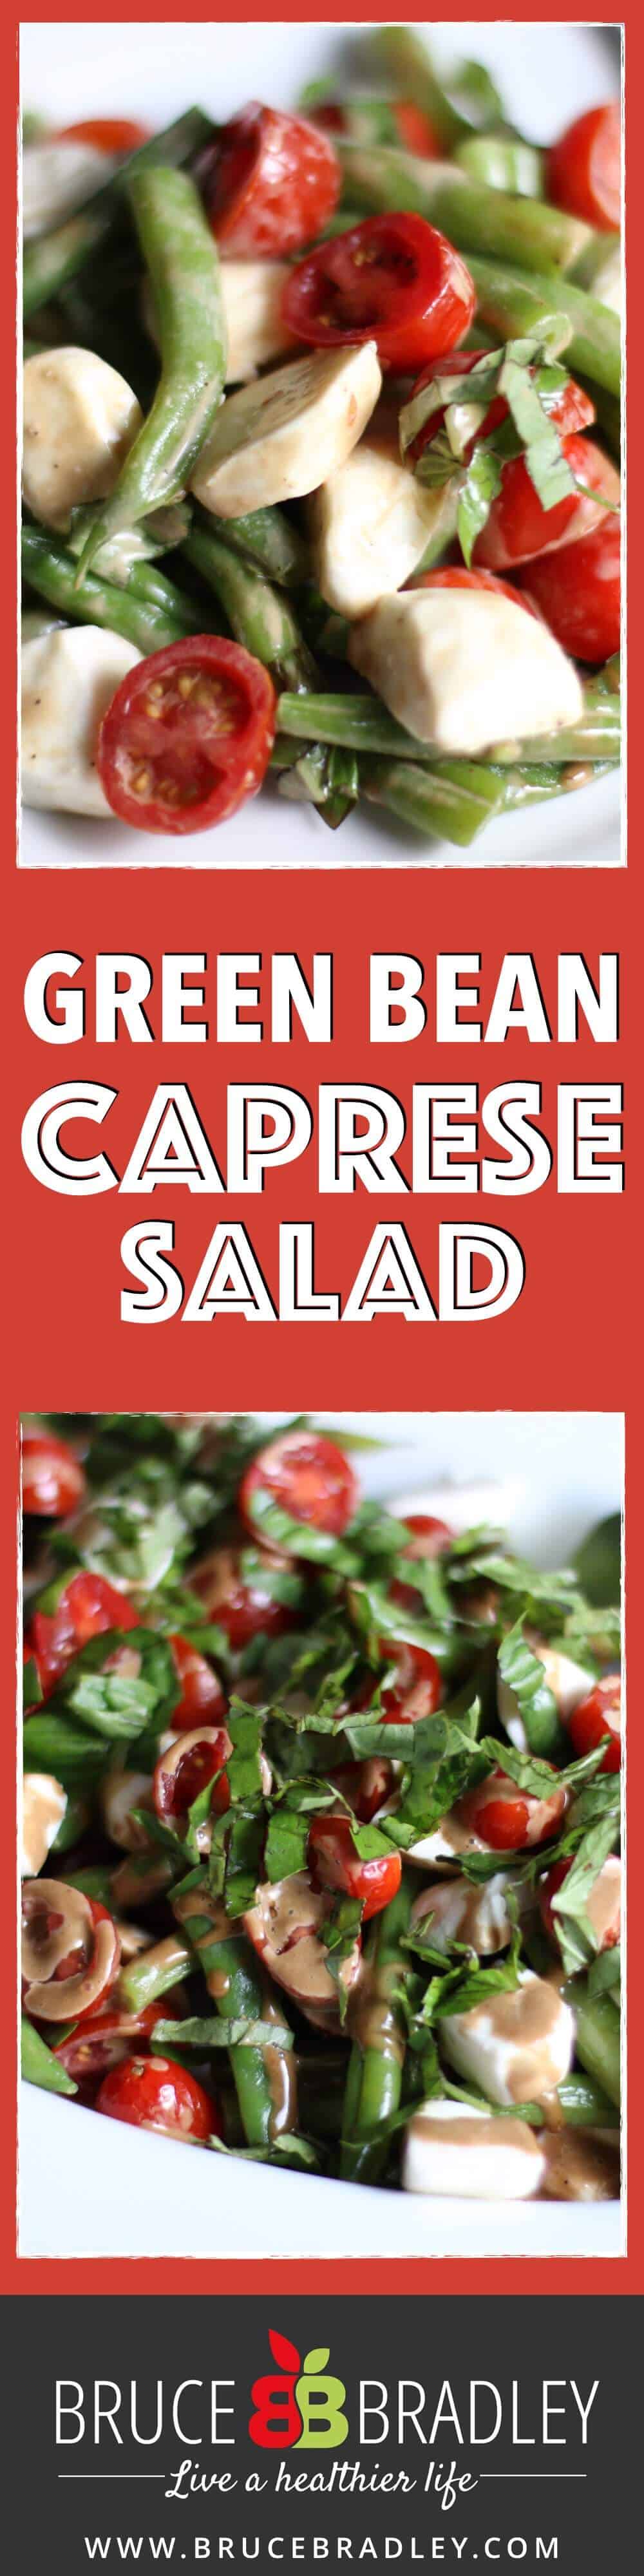 Green Bean Caprese Salad Is A Fantastic Hot Or Cold Salad Made With Green Beans, Tomatoes, Fresh Mozzarella, Basil, And A Creamy Balsamic Vinaigrette!